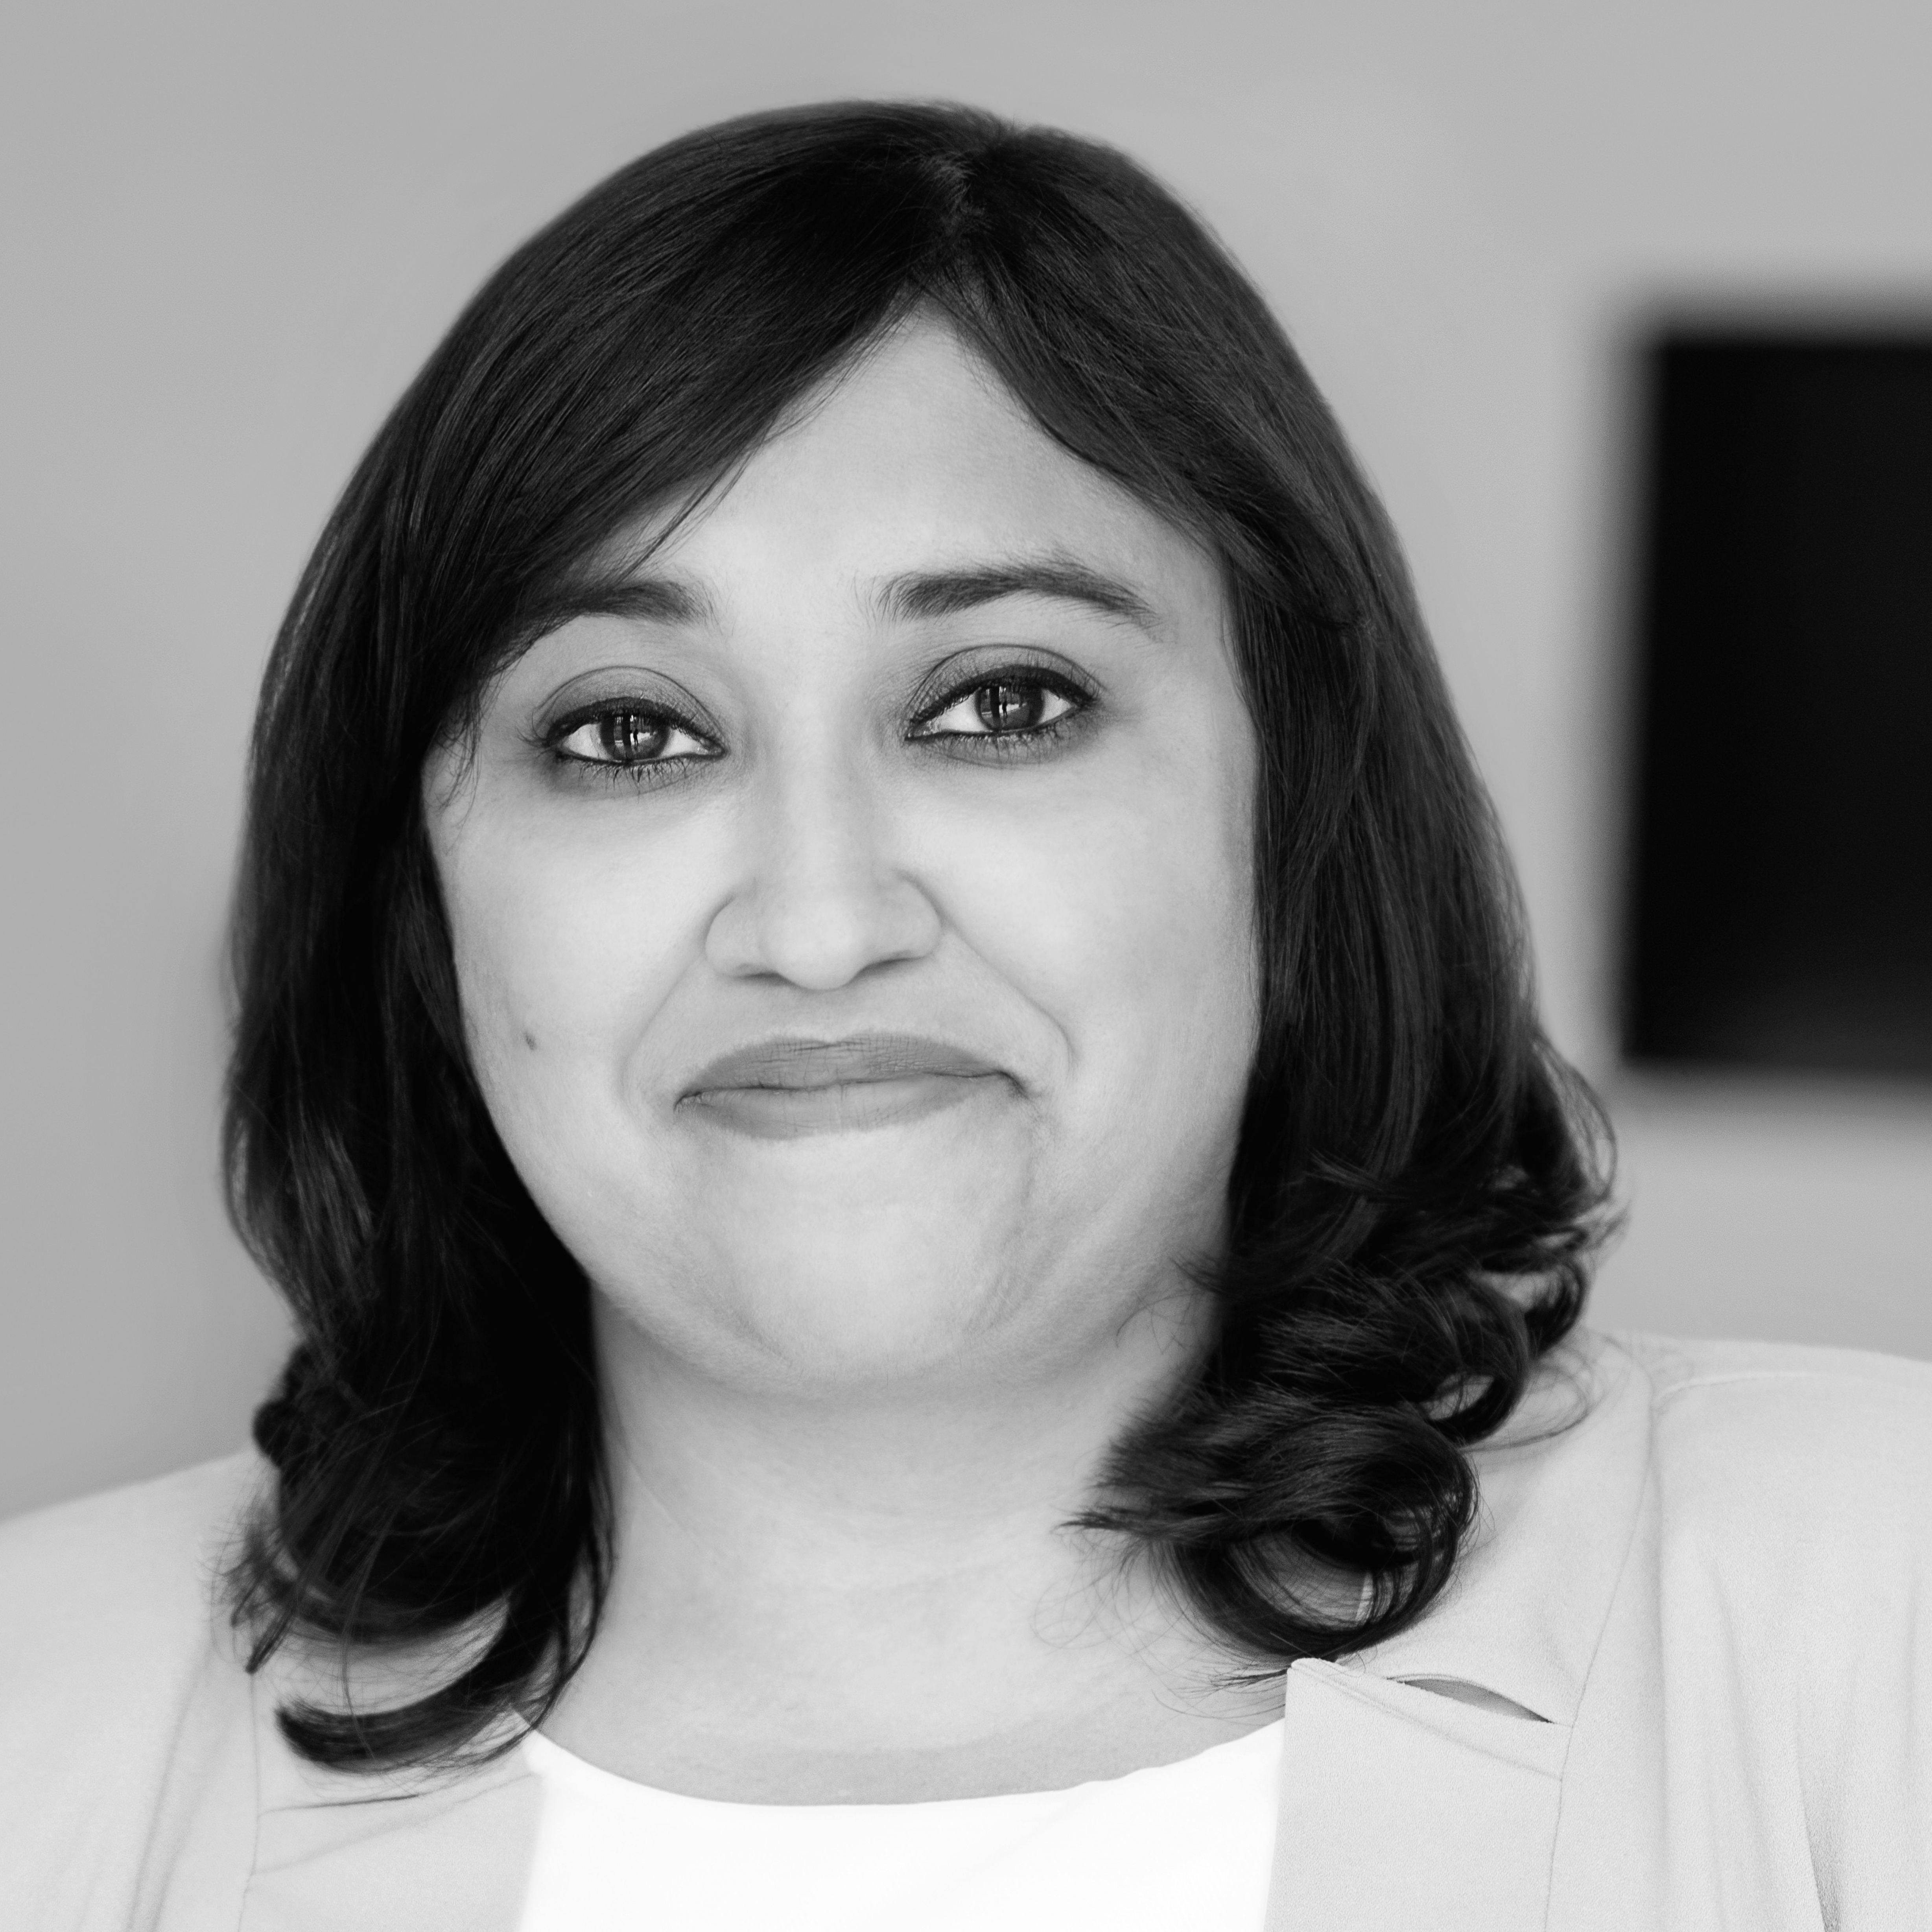 Aparna Mittal, <span>Leading Diversity & Inclusion Advisor & Corporate Lawyer & Founder Samana Centre for Gender, Policy and Law</span>